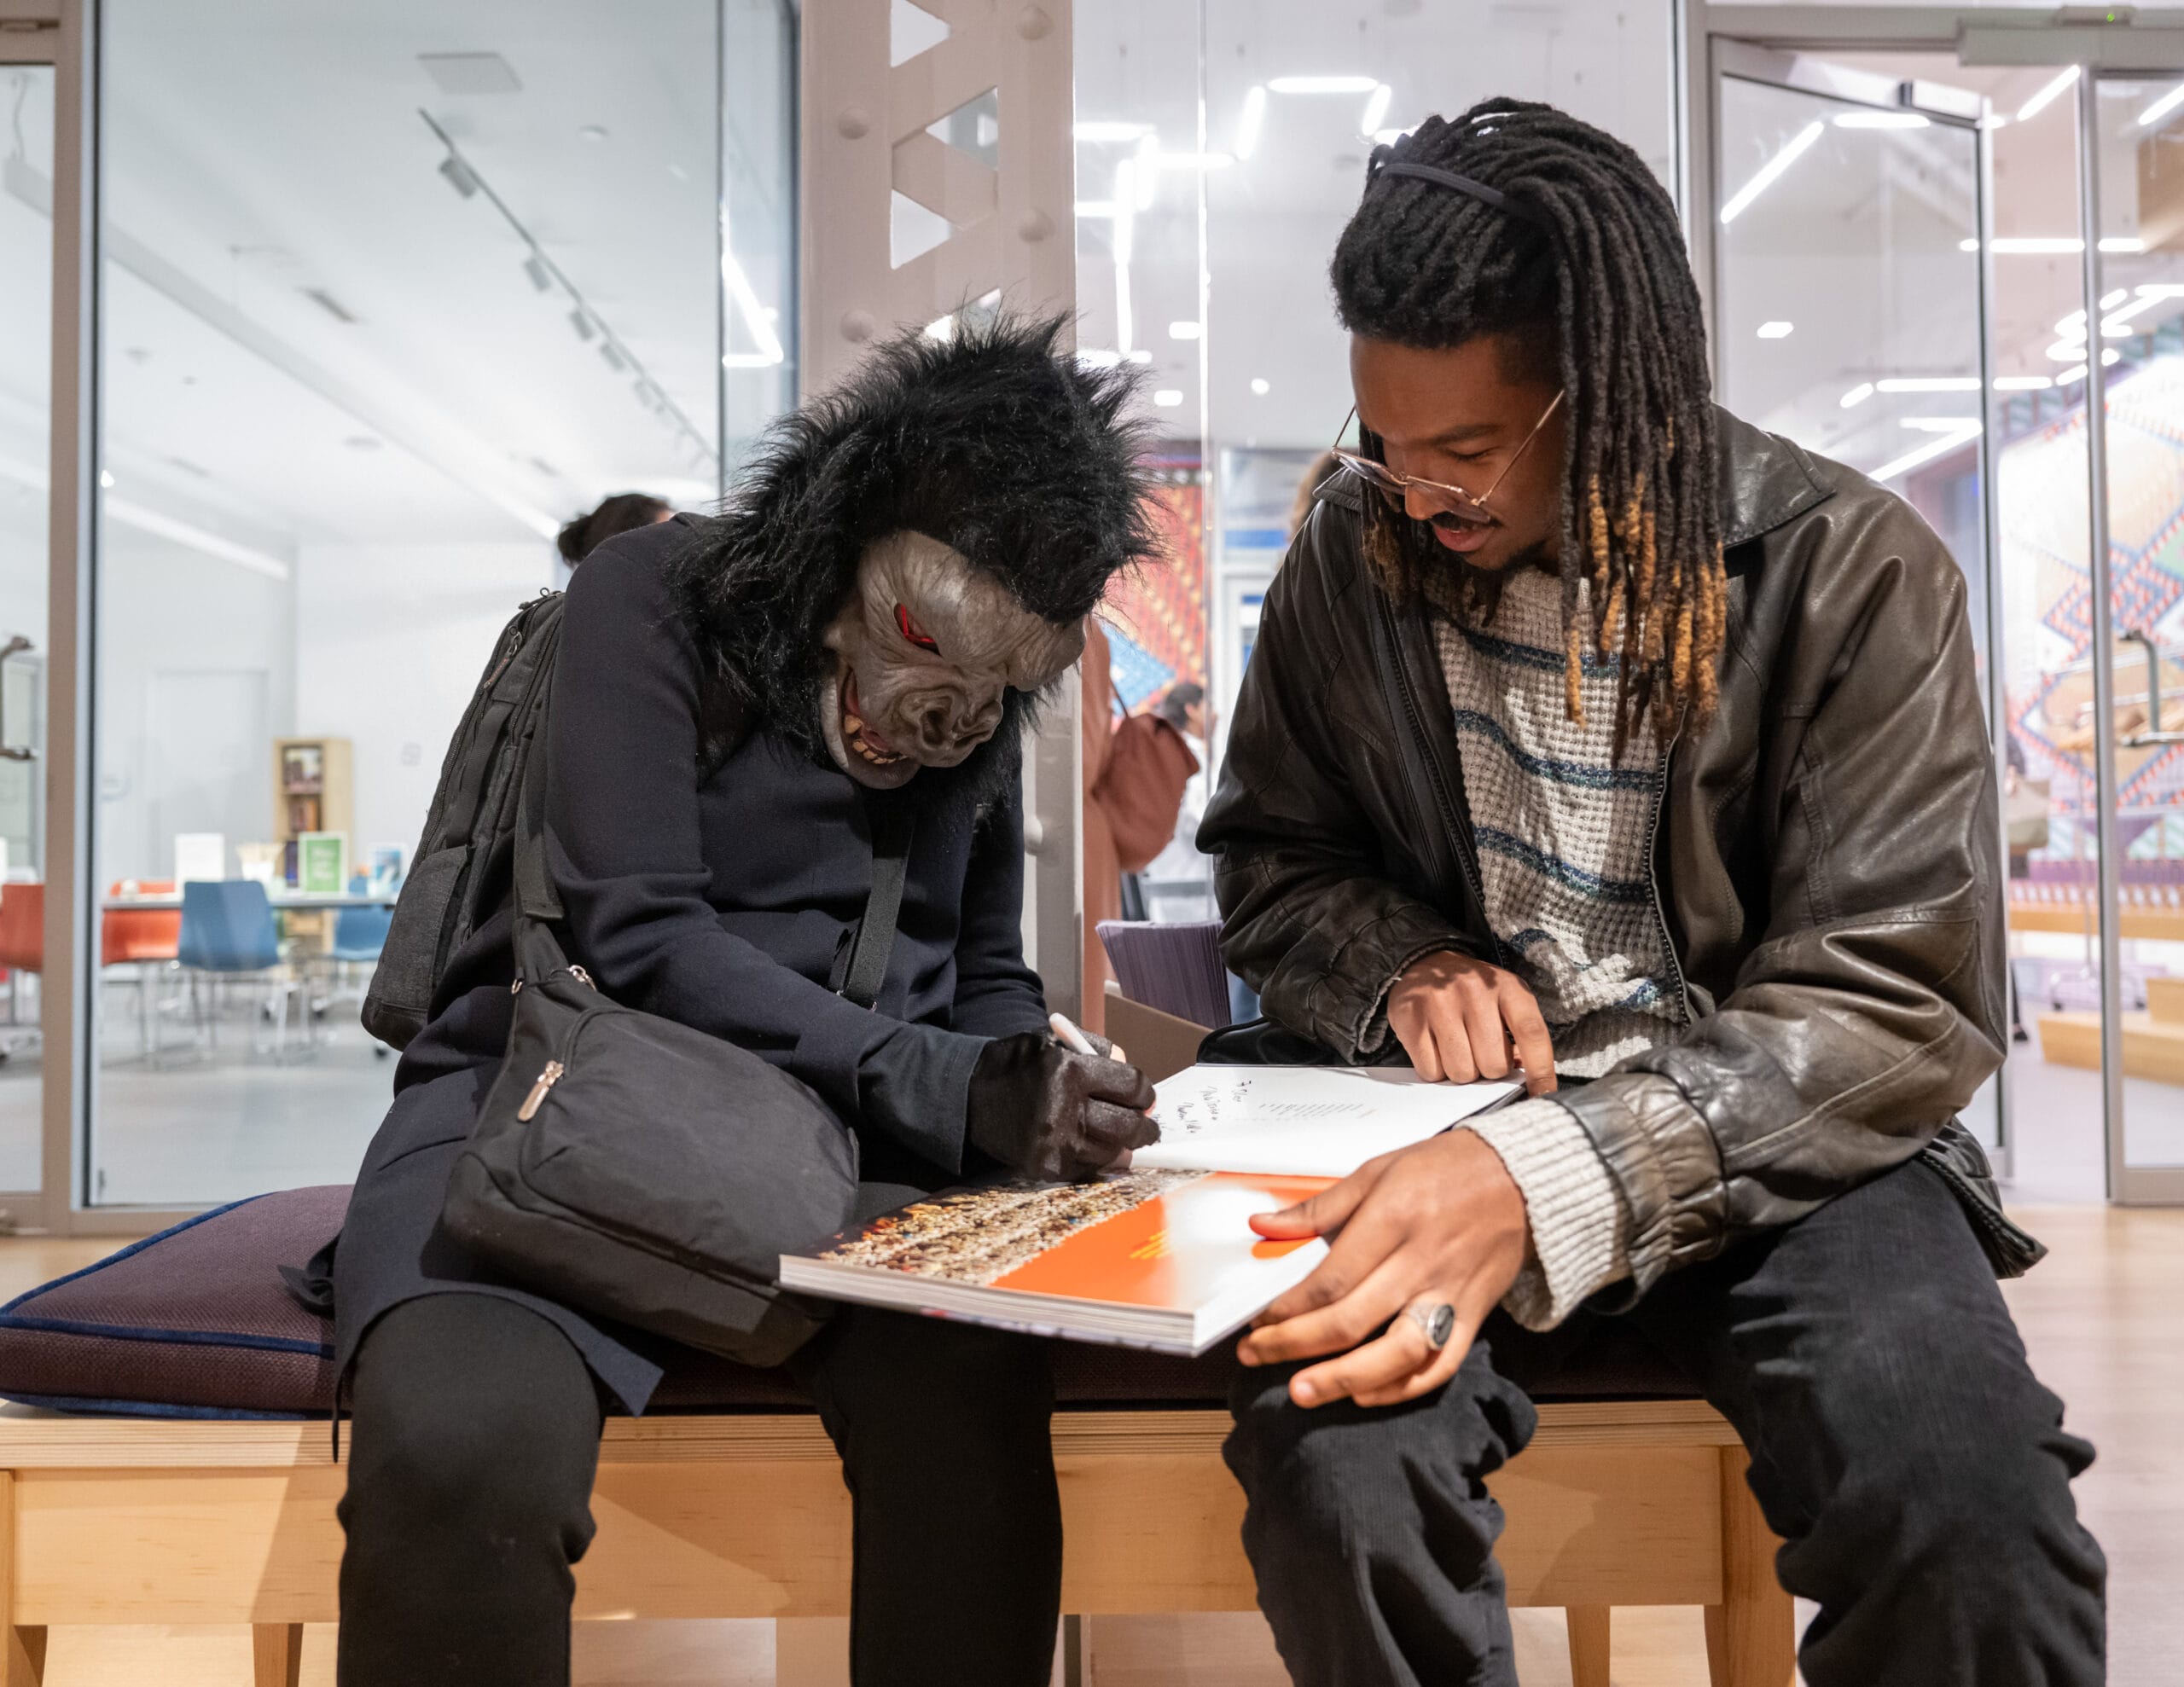 A person in a guerilla costume sits and signs a book held by a visitor to the MassArt Art Museum.